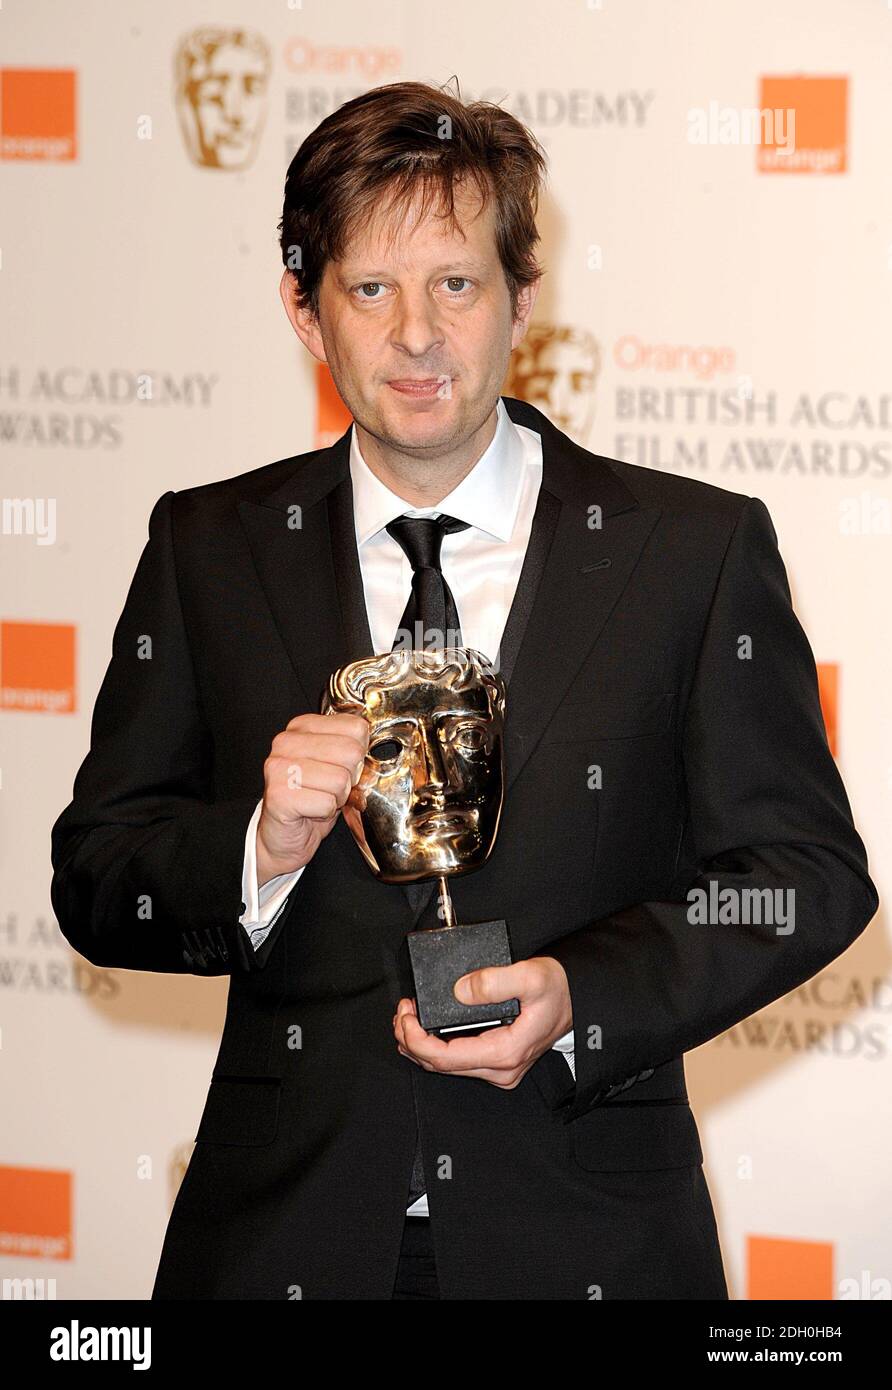 Christian Colson with the Best Film award received for Slumdog Millionaire at the 2009 British Academy Film Awards at the Royal Opera House in Covent Garden, central London. THE USE OF THIS IMAGE IS STRICTLY EMBARGOED UNTIL 21:30 GMT ON SUNDAY 8TH FEBRUARY. Stock Photo